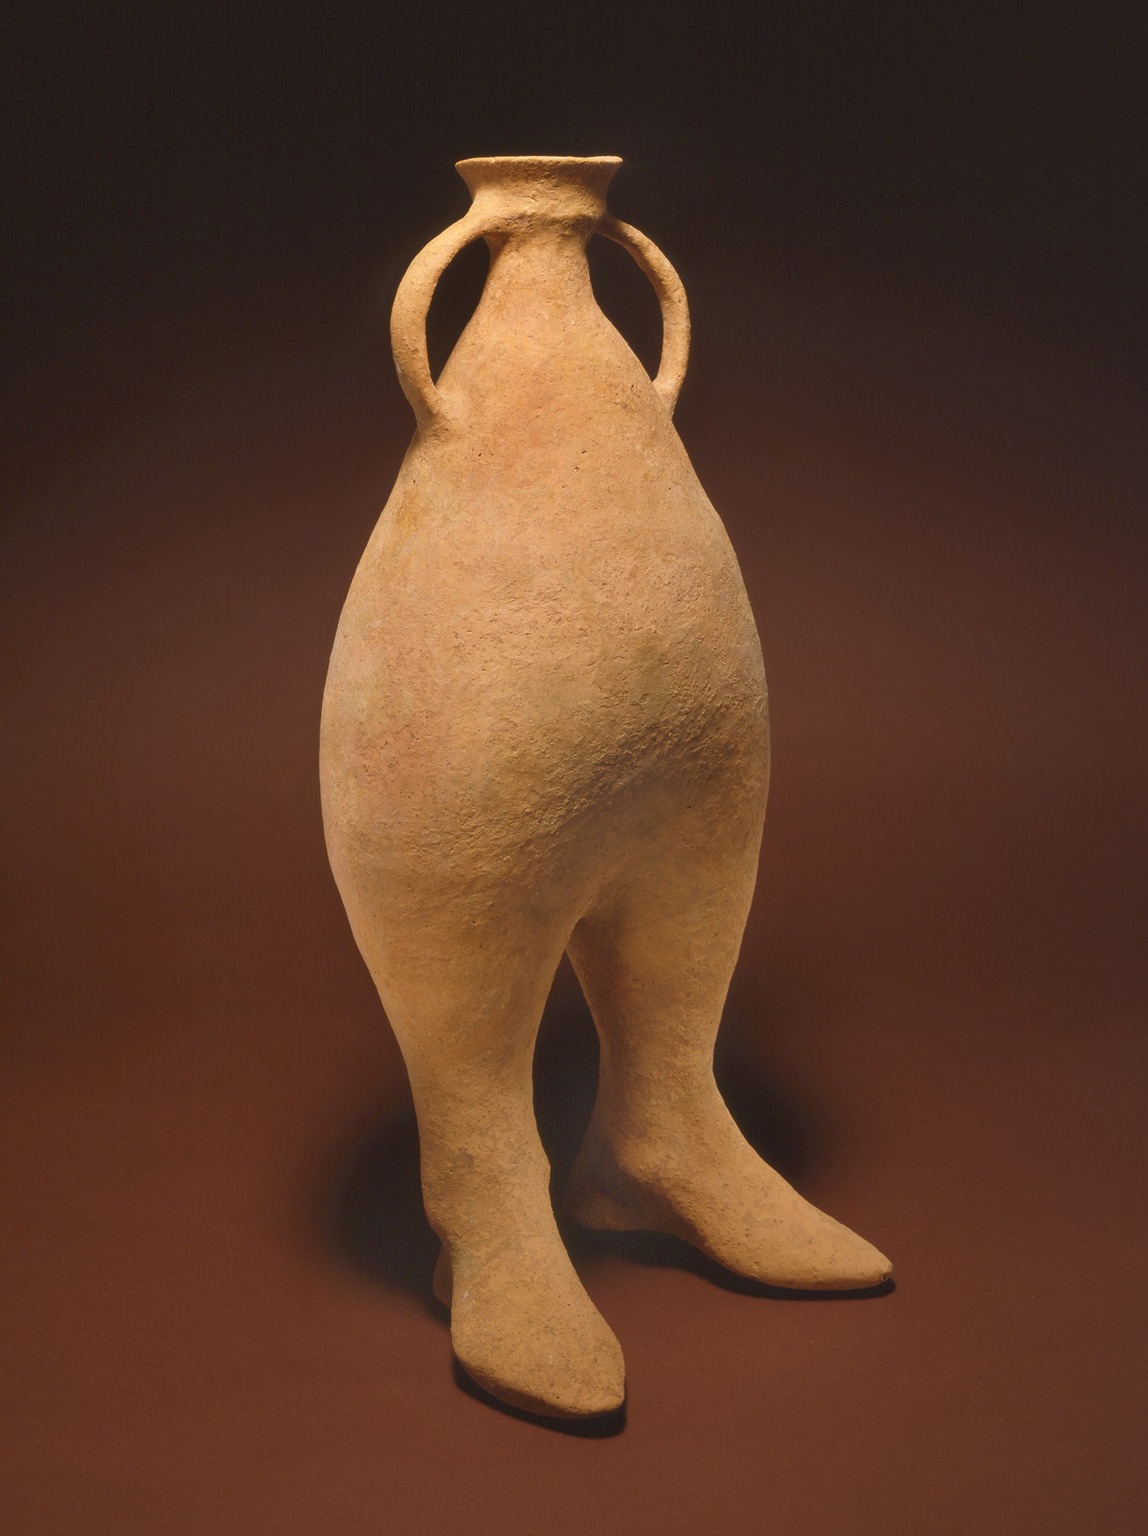 Vessel with Two Feet by Unknown Artist - ca. 1000-800 B.C.E. - 48 x 19.5 cm Brooklyn Museum